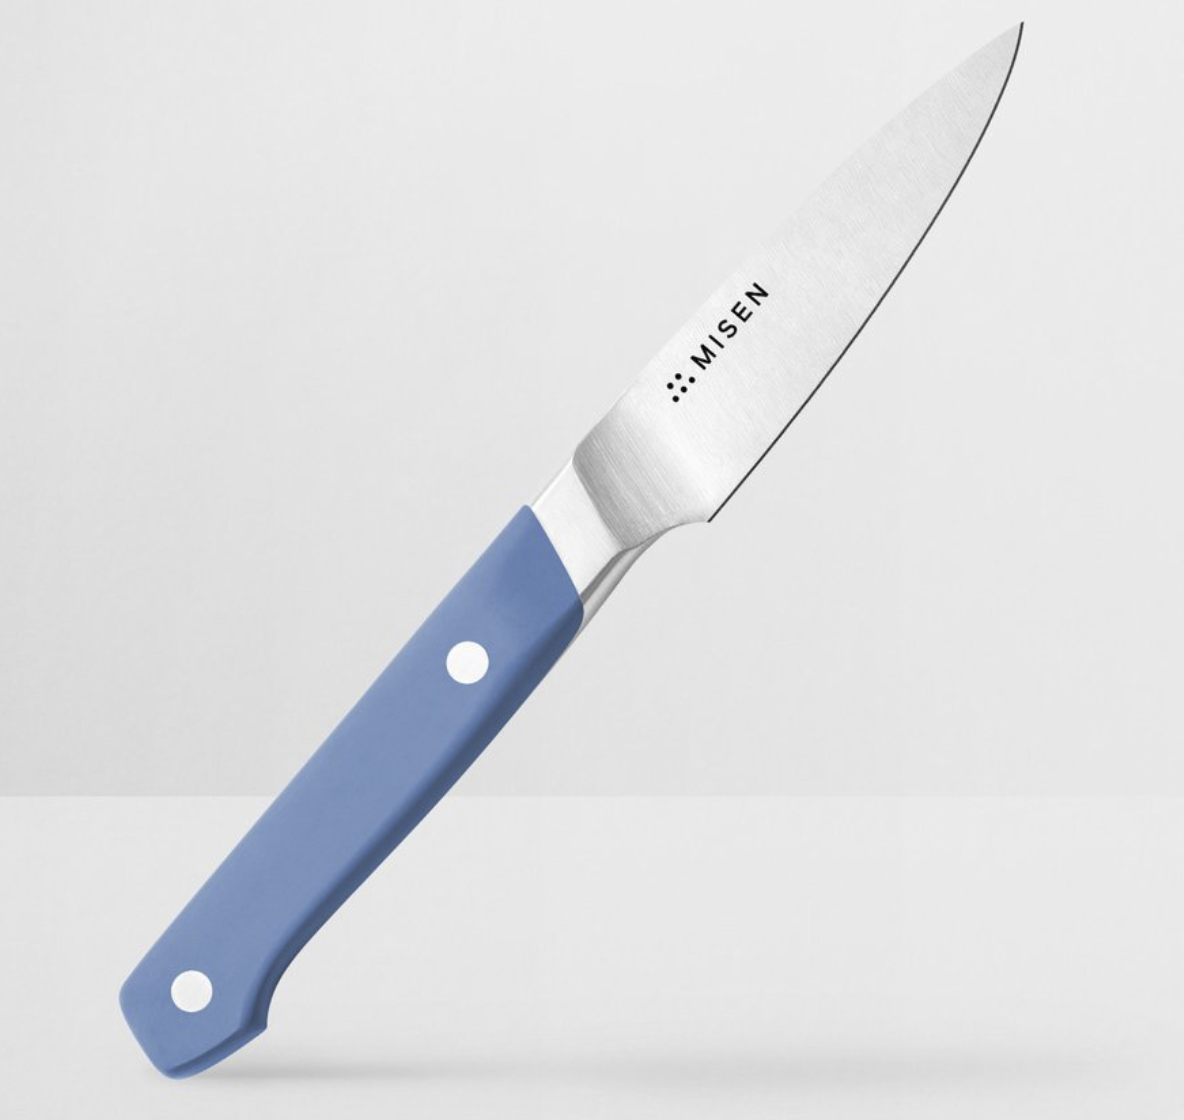 Misen, the internet-only knife brand, gets to paring